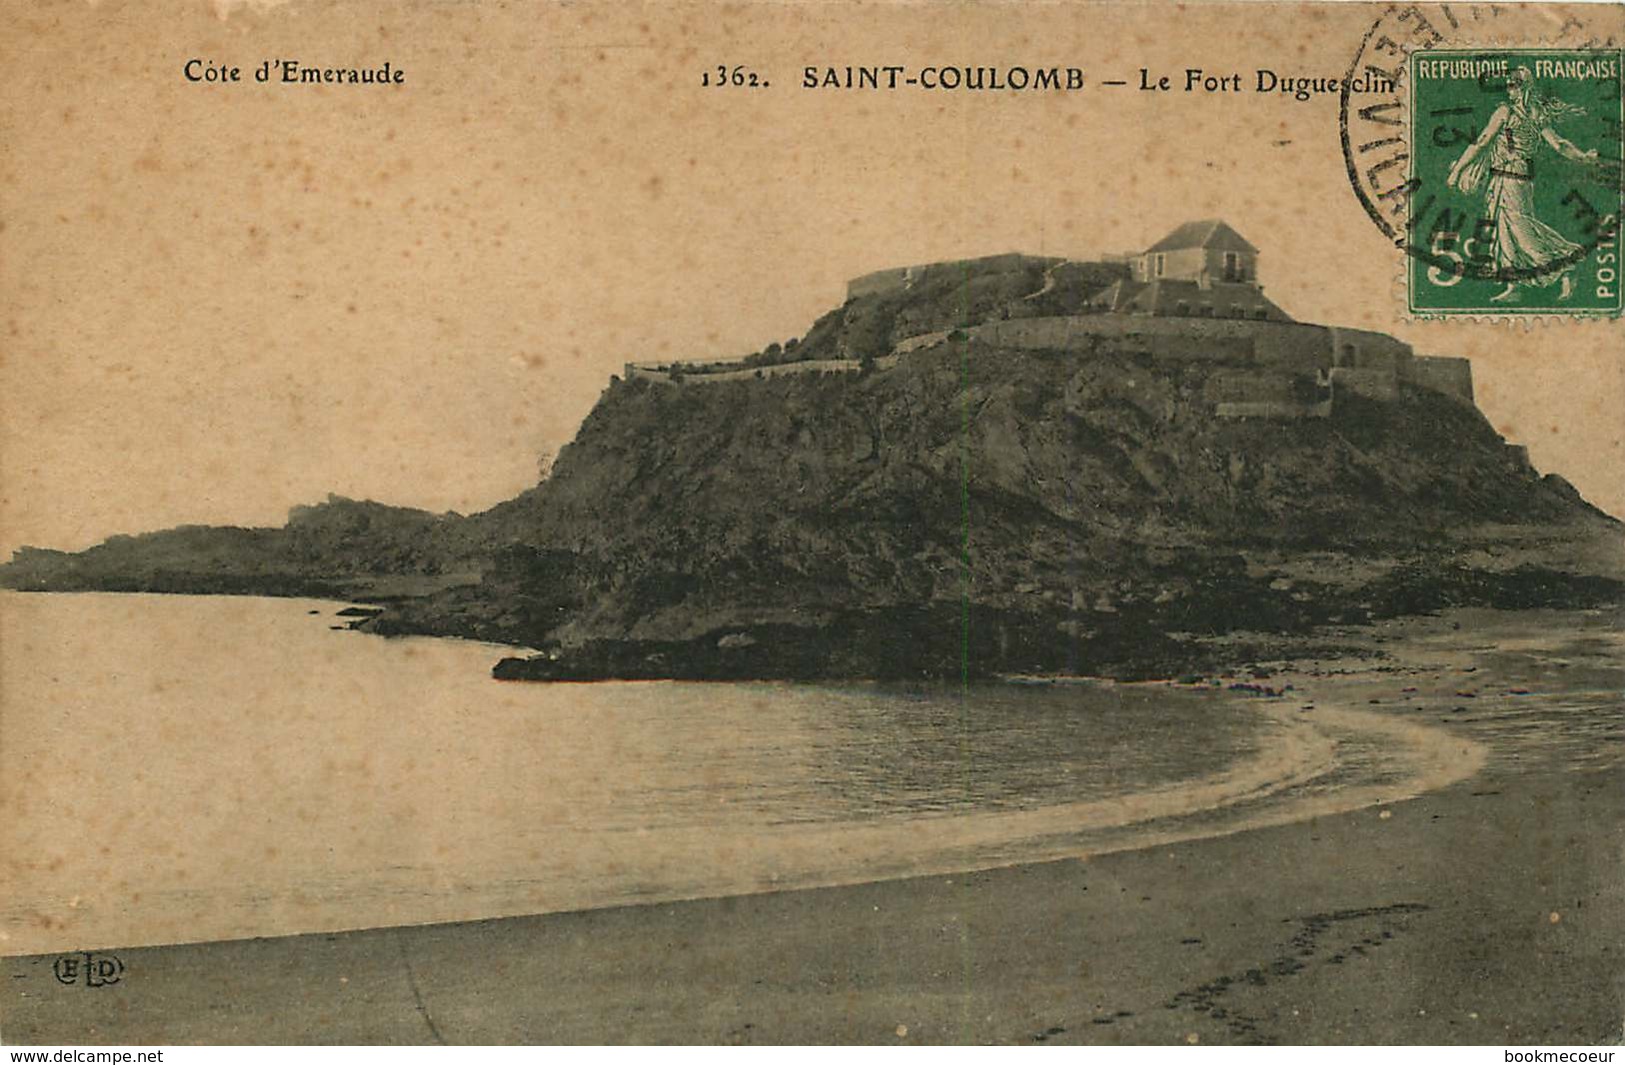 35  ST COULOMB  LE FORT DUGUESCLIN - Saint-Coulomb